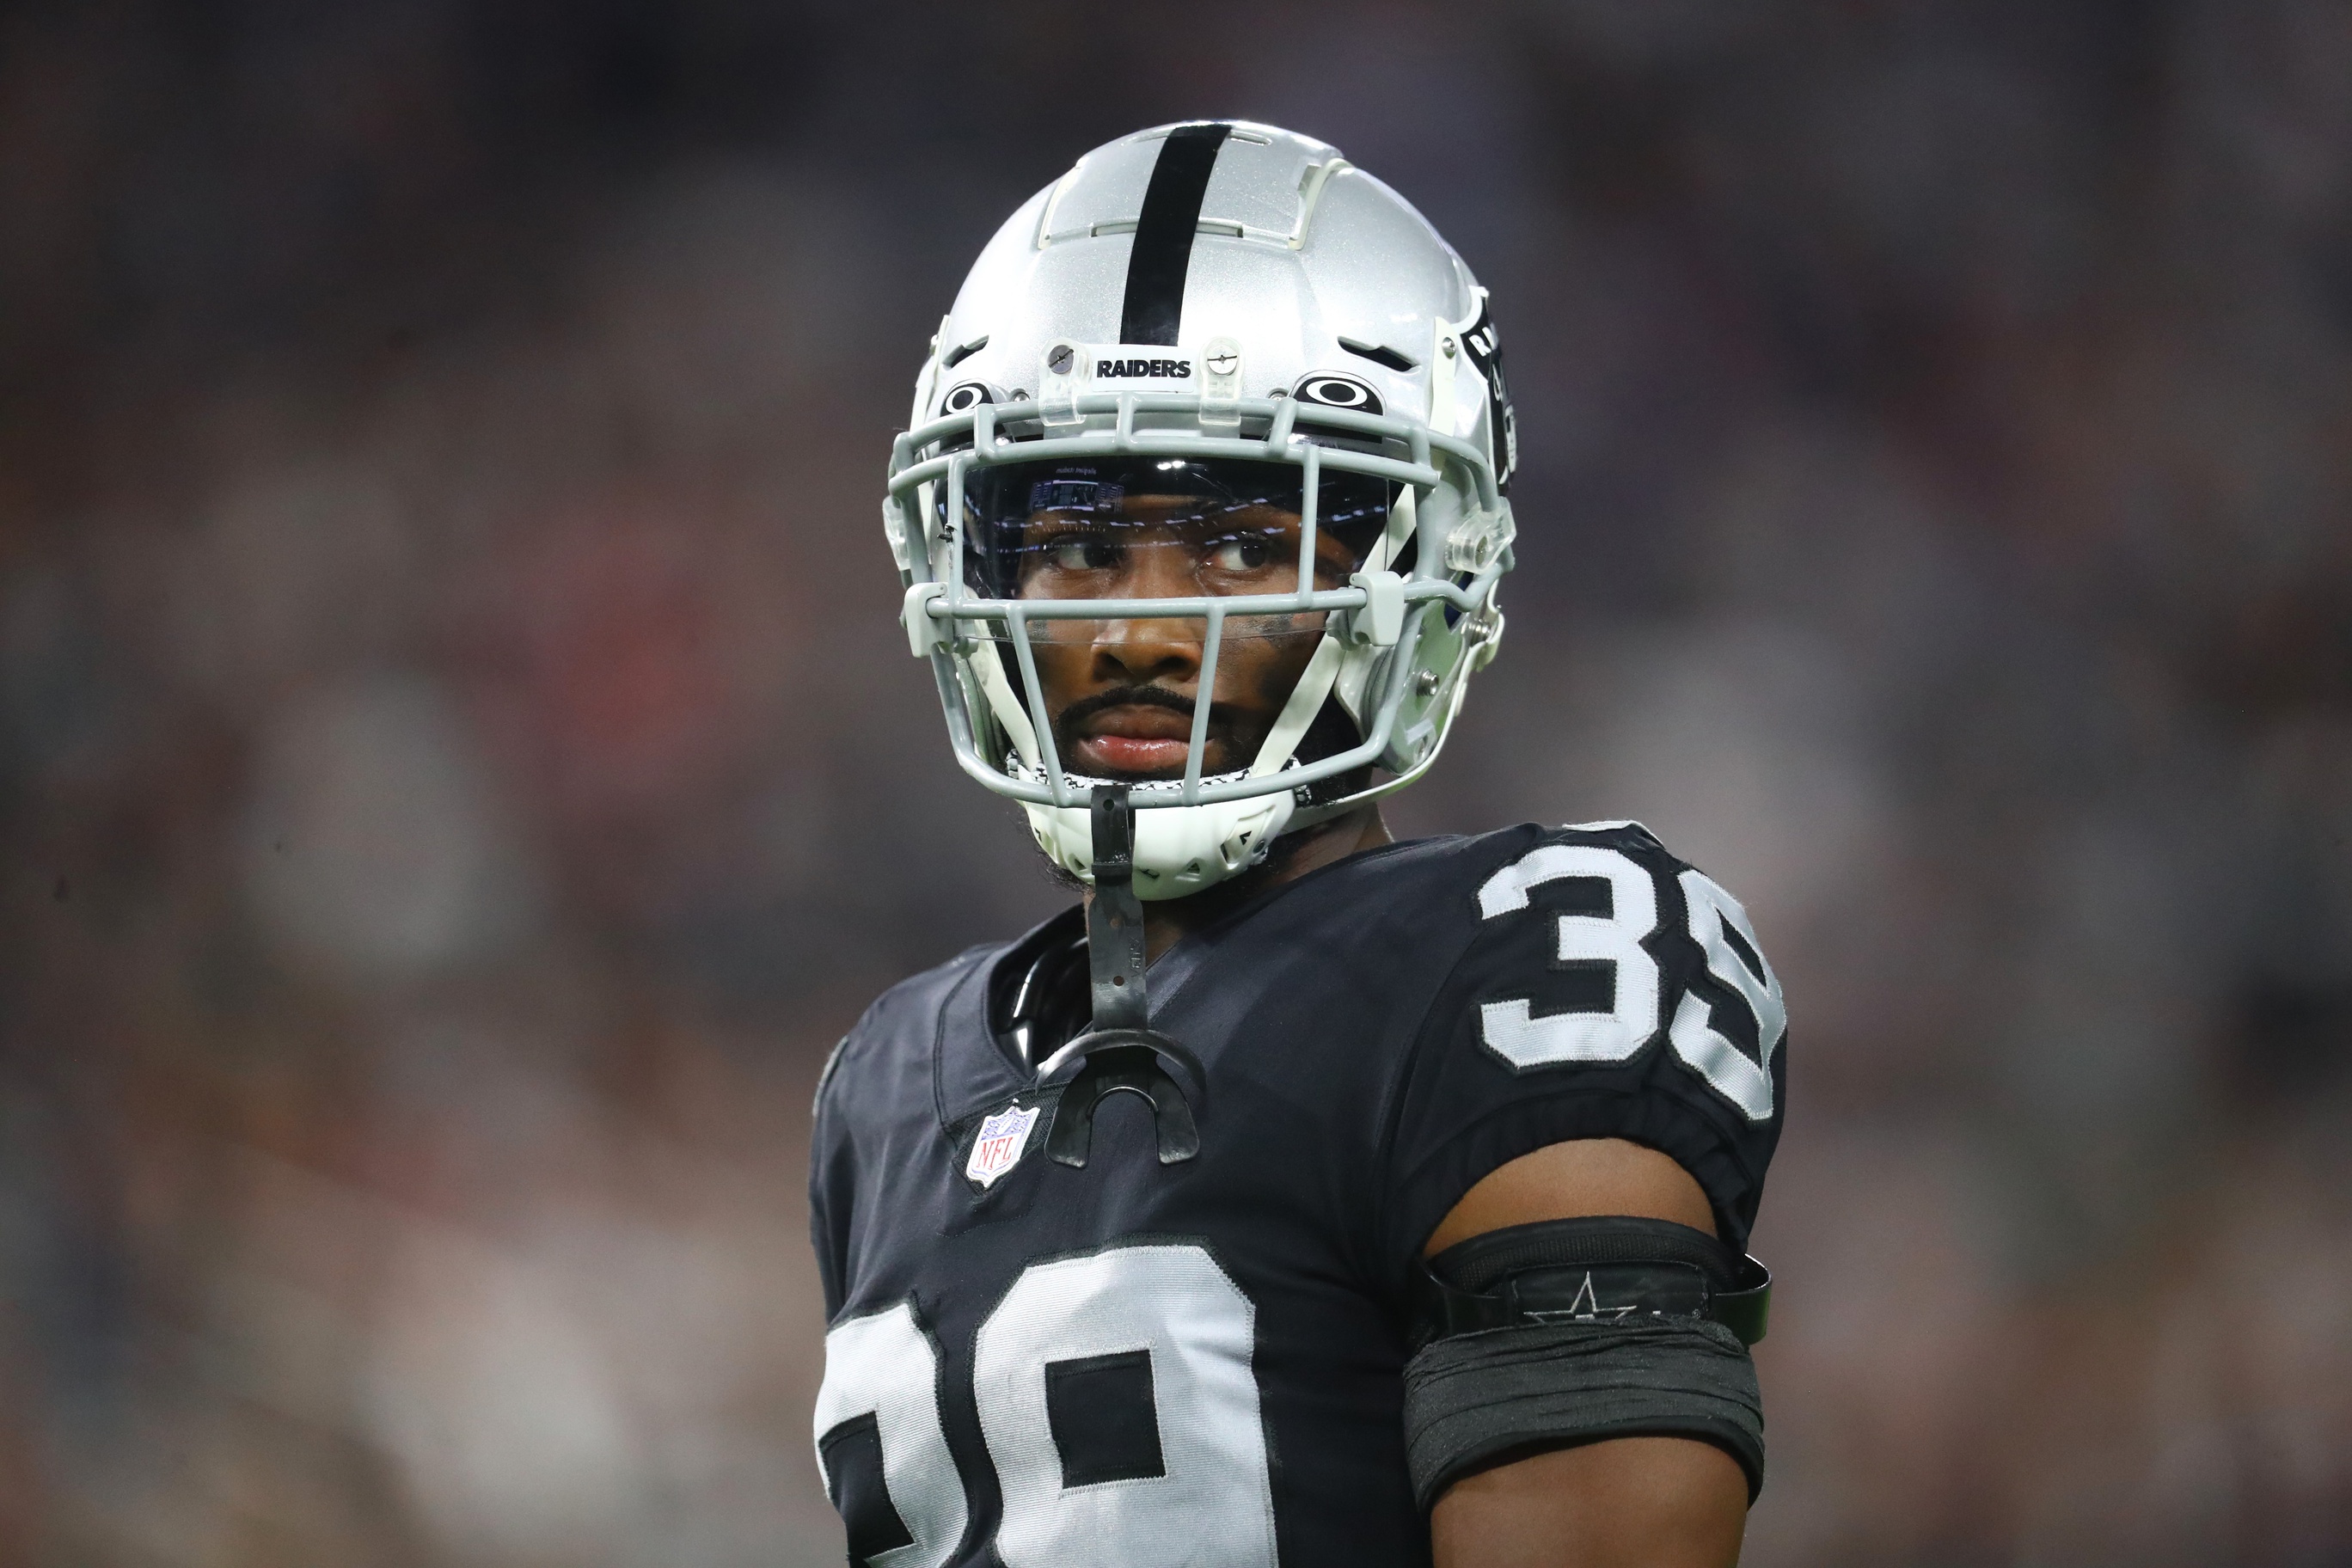 Raiders CB Nate Hobbs cited for driving 110 mph 2 weeks after DUI arrest